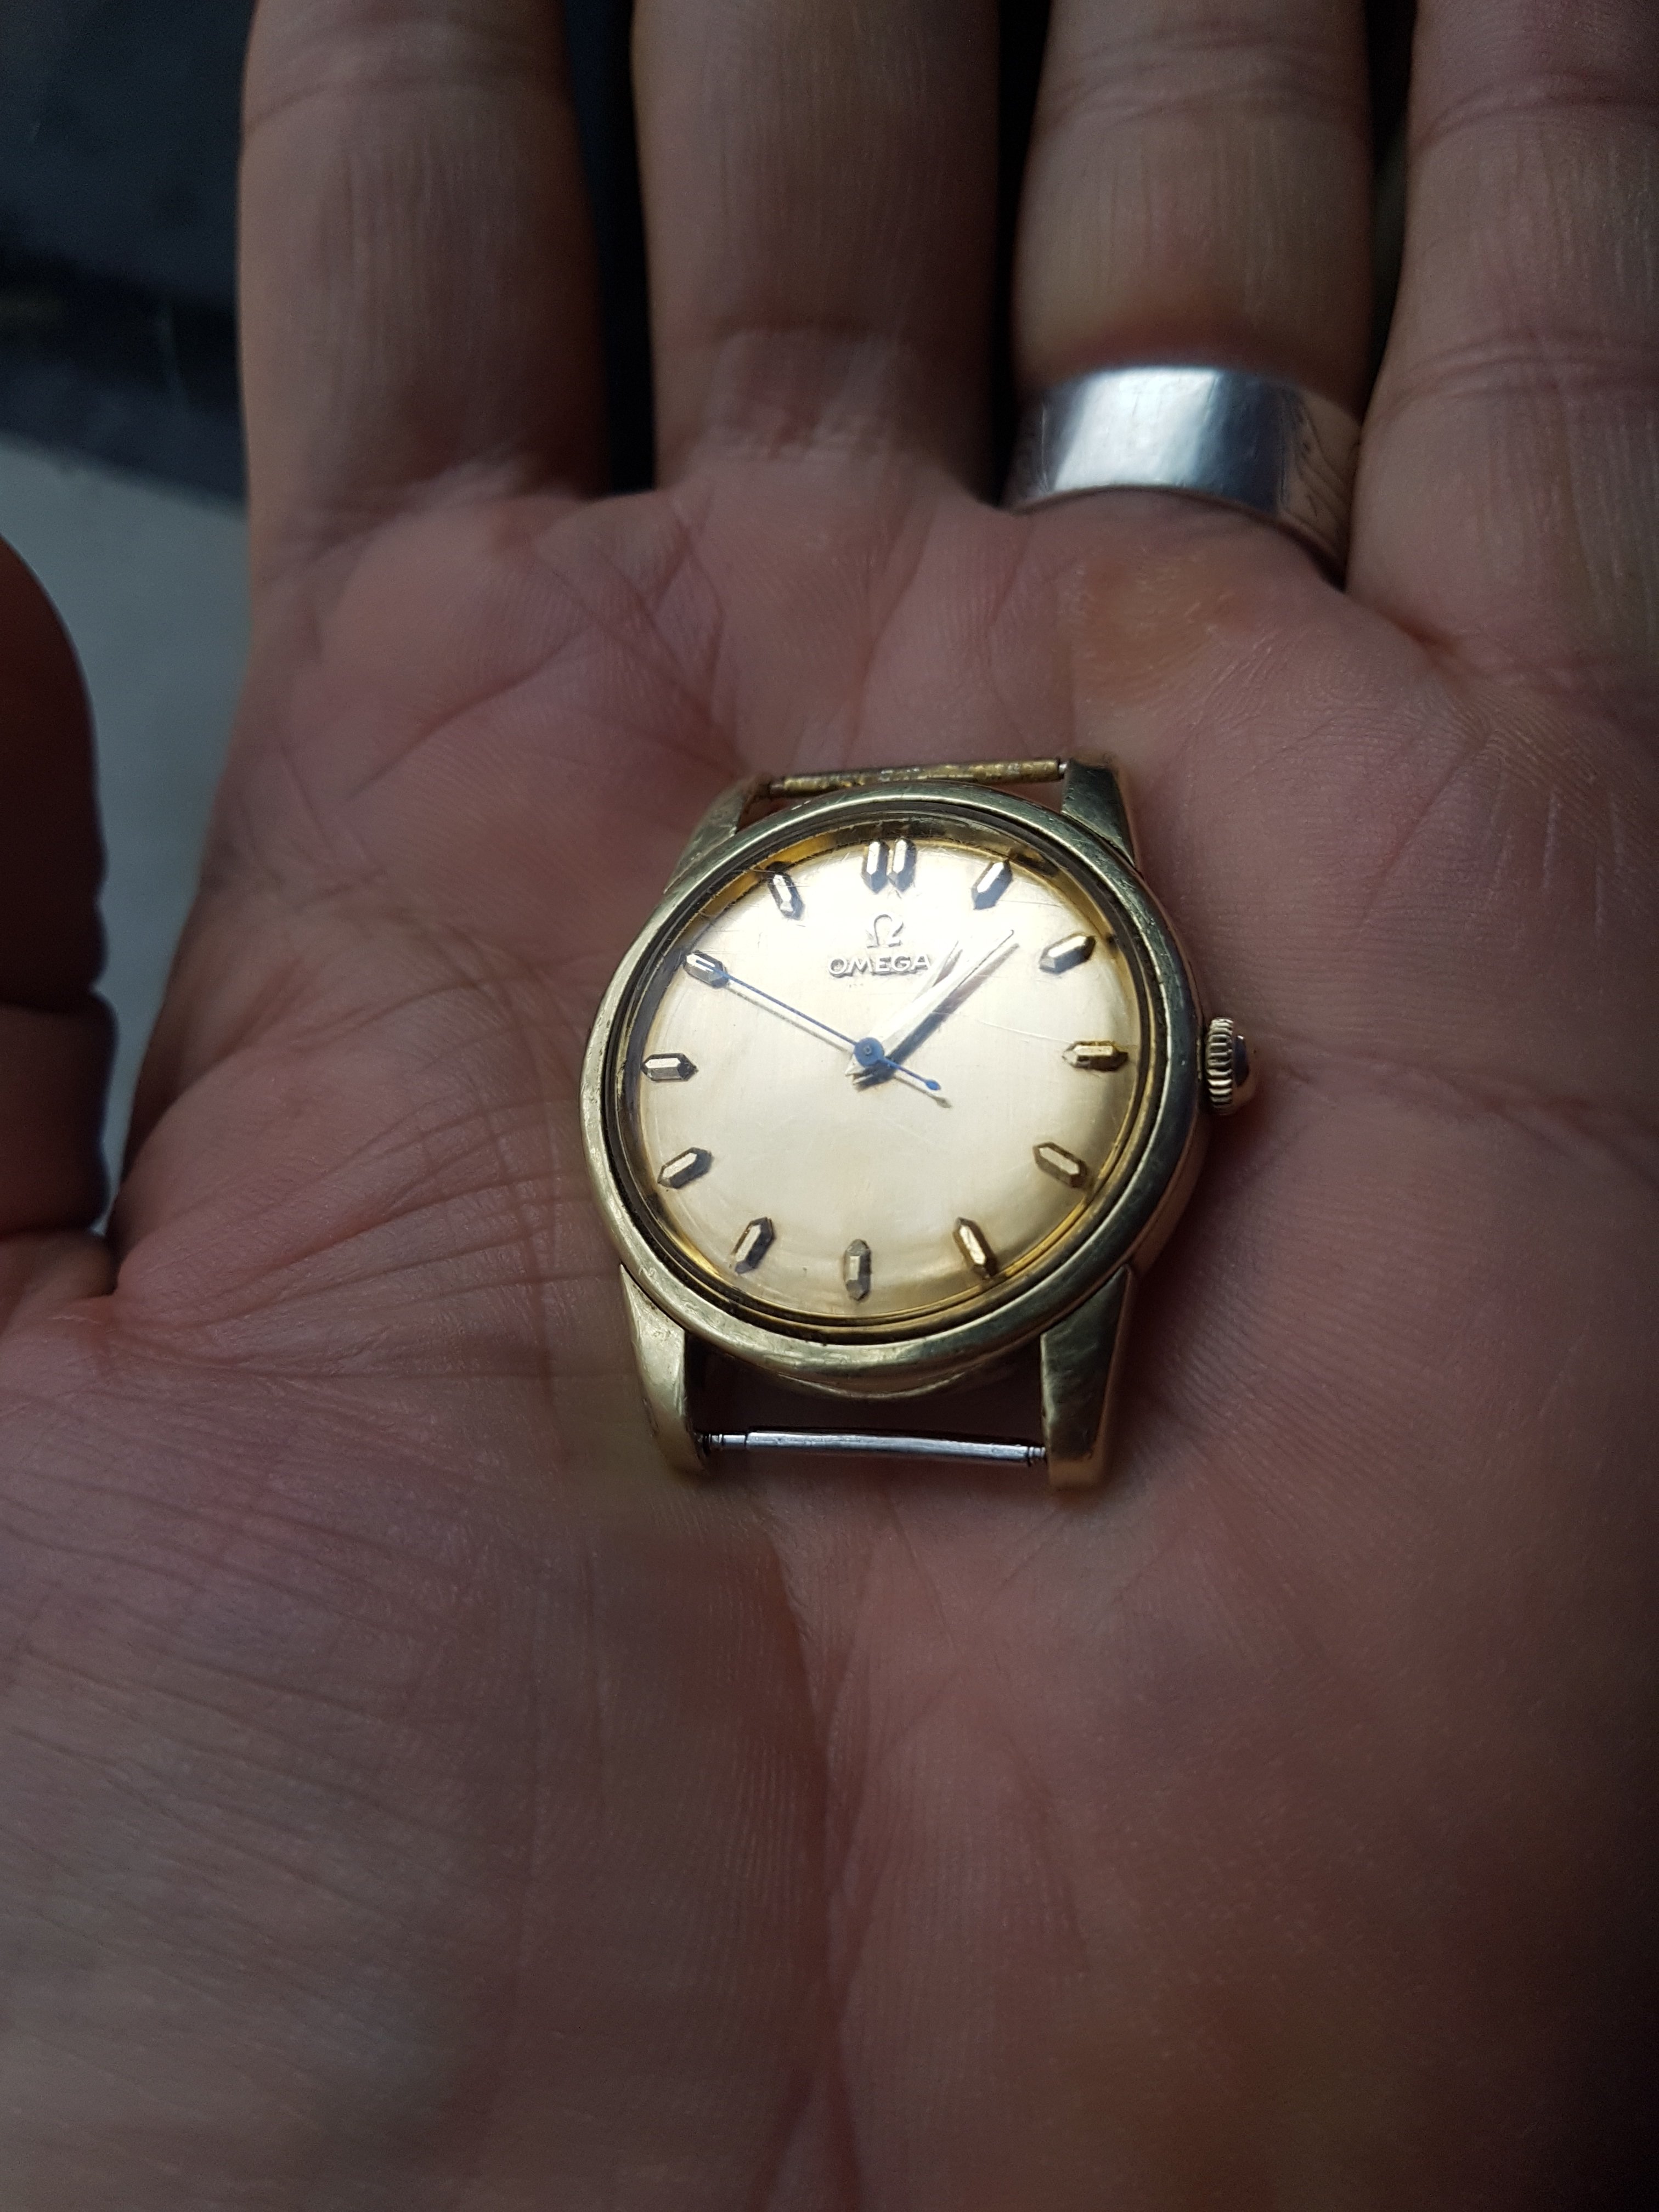 1956 Seamaster cal. 501 2846-2848 SC reface advice needed | Omega ...